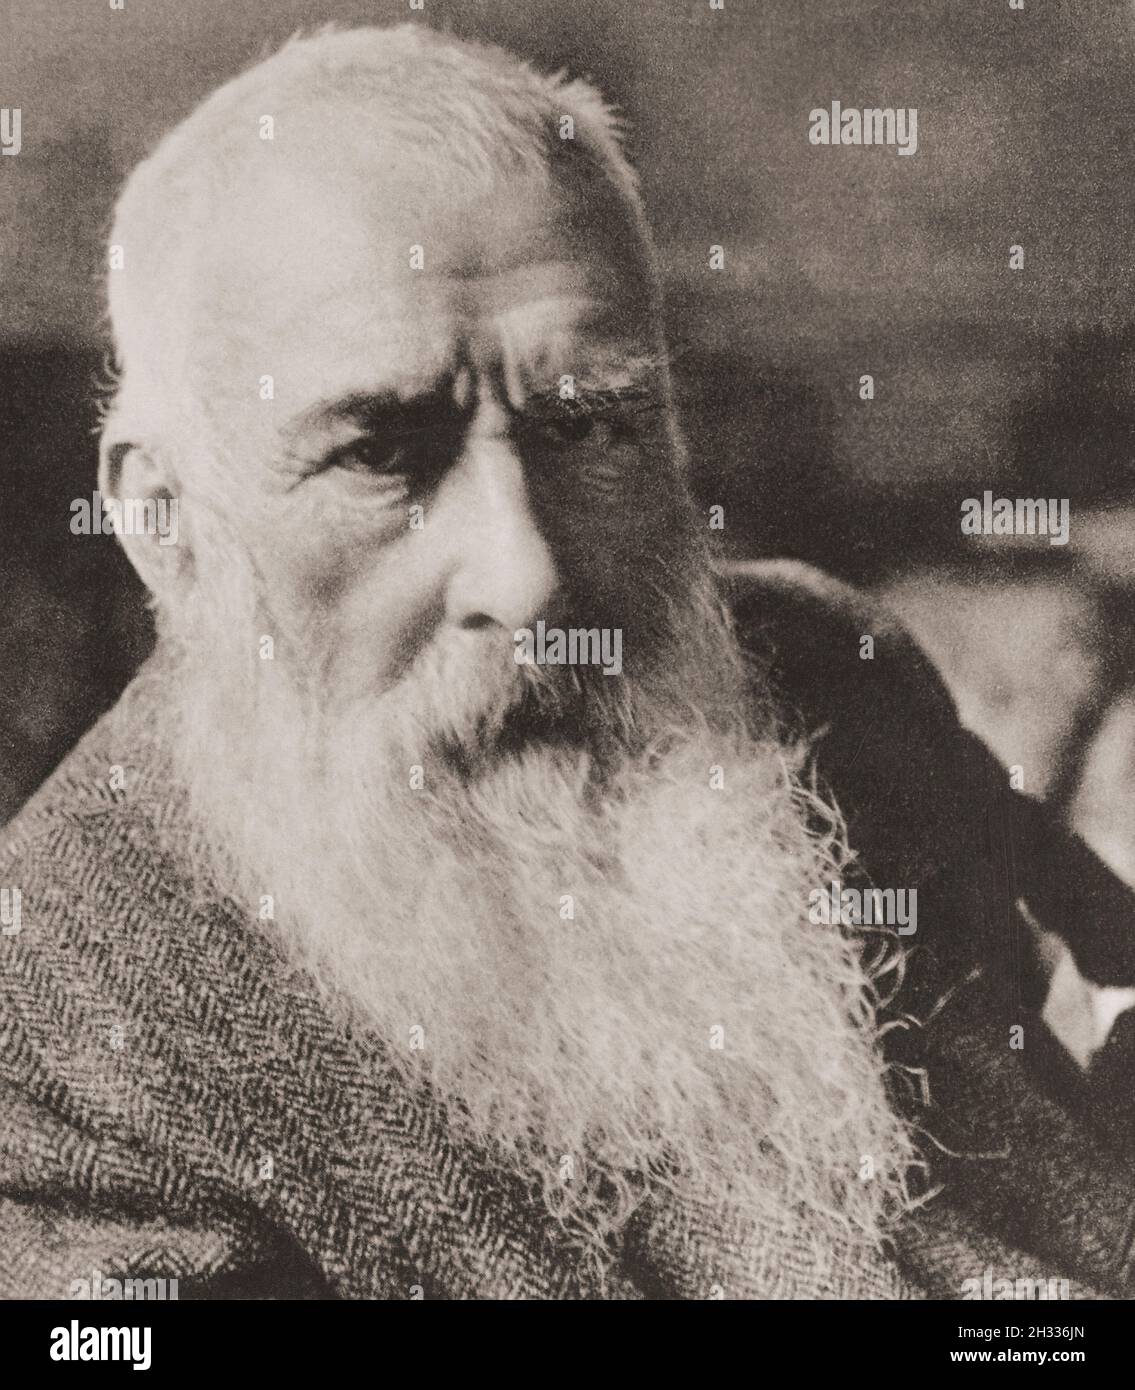 Oscar-Claude Monet, 1840 - 1926, popularly known as Claude Monet.  French Impressionist artist. Stock Photo